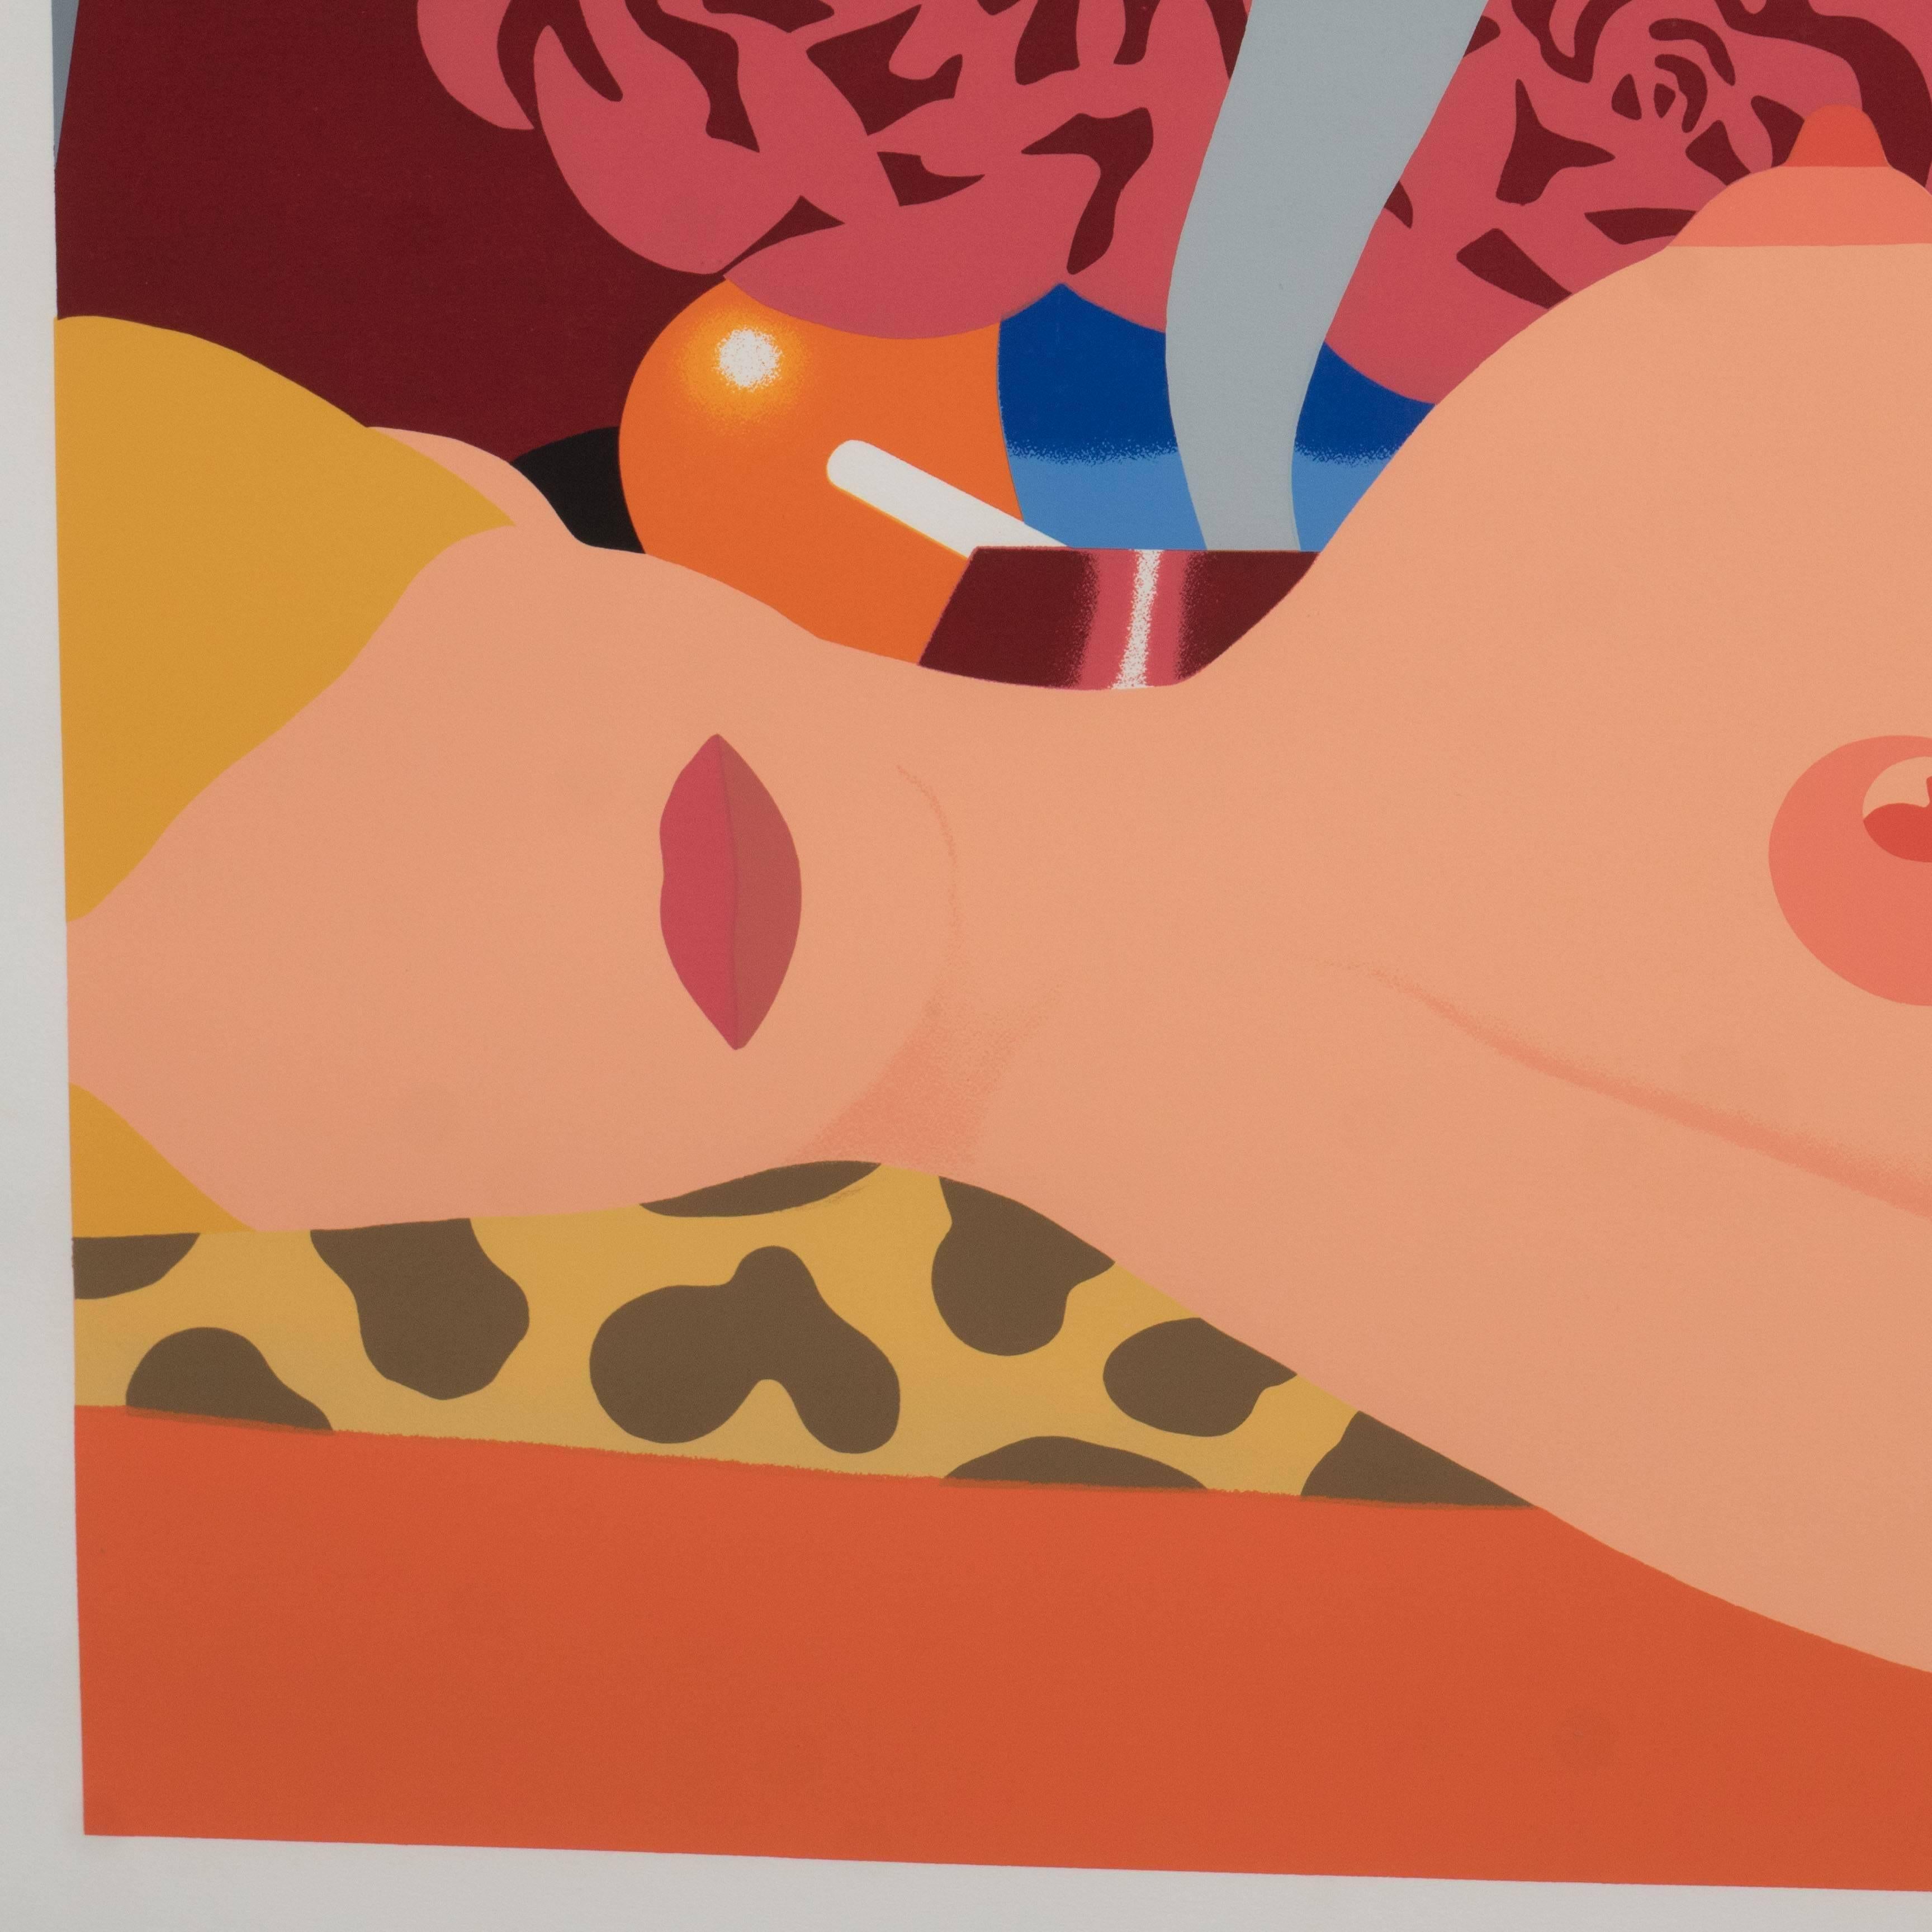 An original print realized by Tom Wesselmann- one of the major figures of the American Pop Art movement- this iconic image of a reclined female contains all of the elements that collectors prize in the artist's work: a bold palette, sinuous lines,